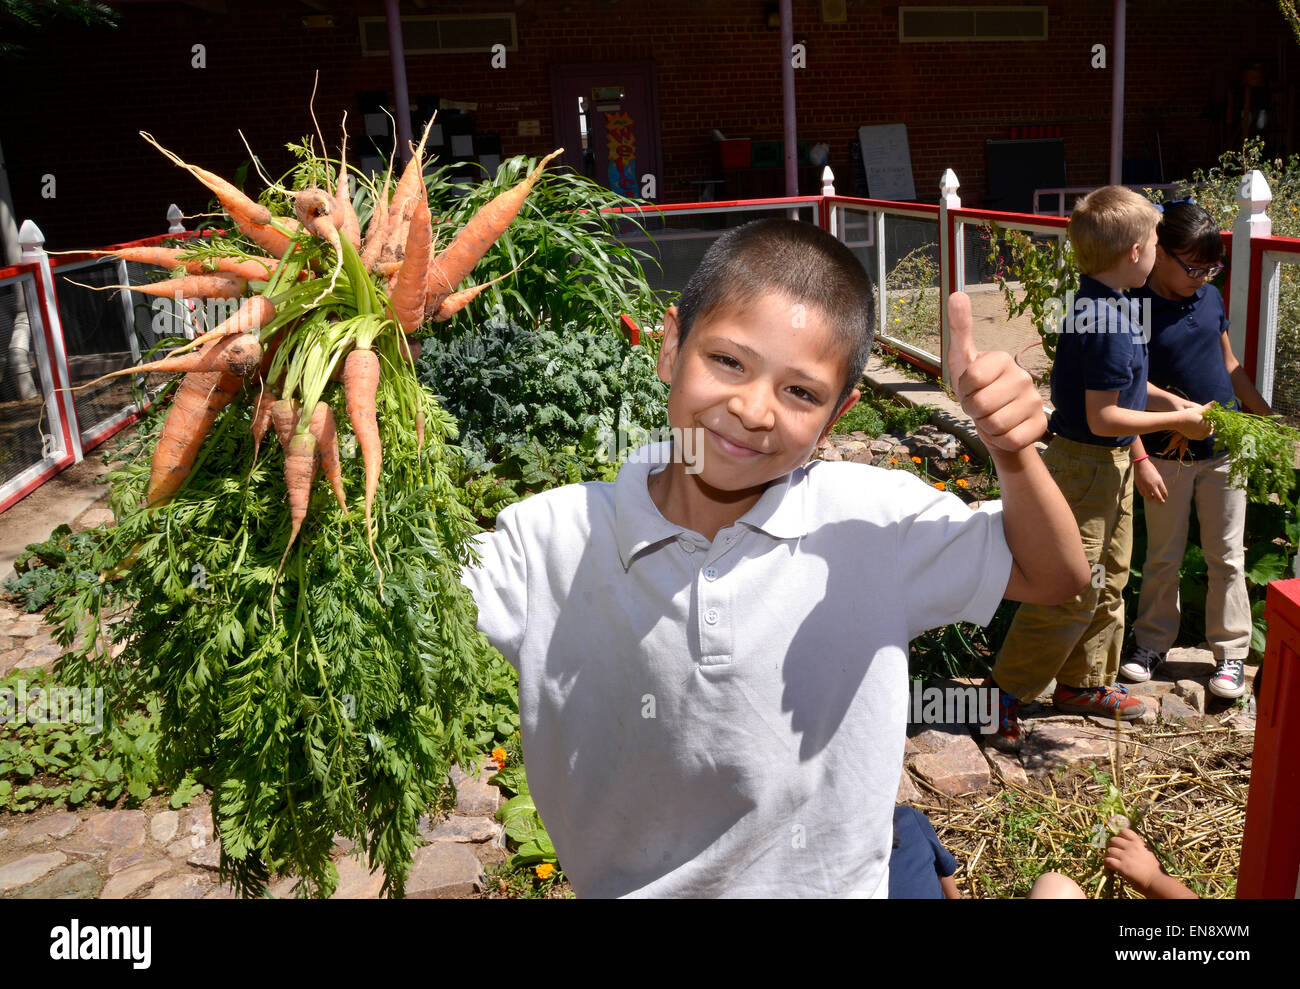 Tucson, Arizona, USA. 29 April, 2015: Jose Nunez, 9, harvests organic carrots from the garden at Manzo Elementary School, Tucson, Arizona, USA.  The school was the first in TUSD to be certified for garden to cafeteria food consumption and first in the state of Arizona for rainwater harvesting and composting. The  garden projects in the district work with internationally known Biosphere2 and the University of Arizona. The garden was built in conjunction with the National Park Foundation's First Bloom program. Credit:  Norma Jean Gargasz/Alamy Live News Stock Photo